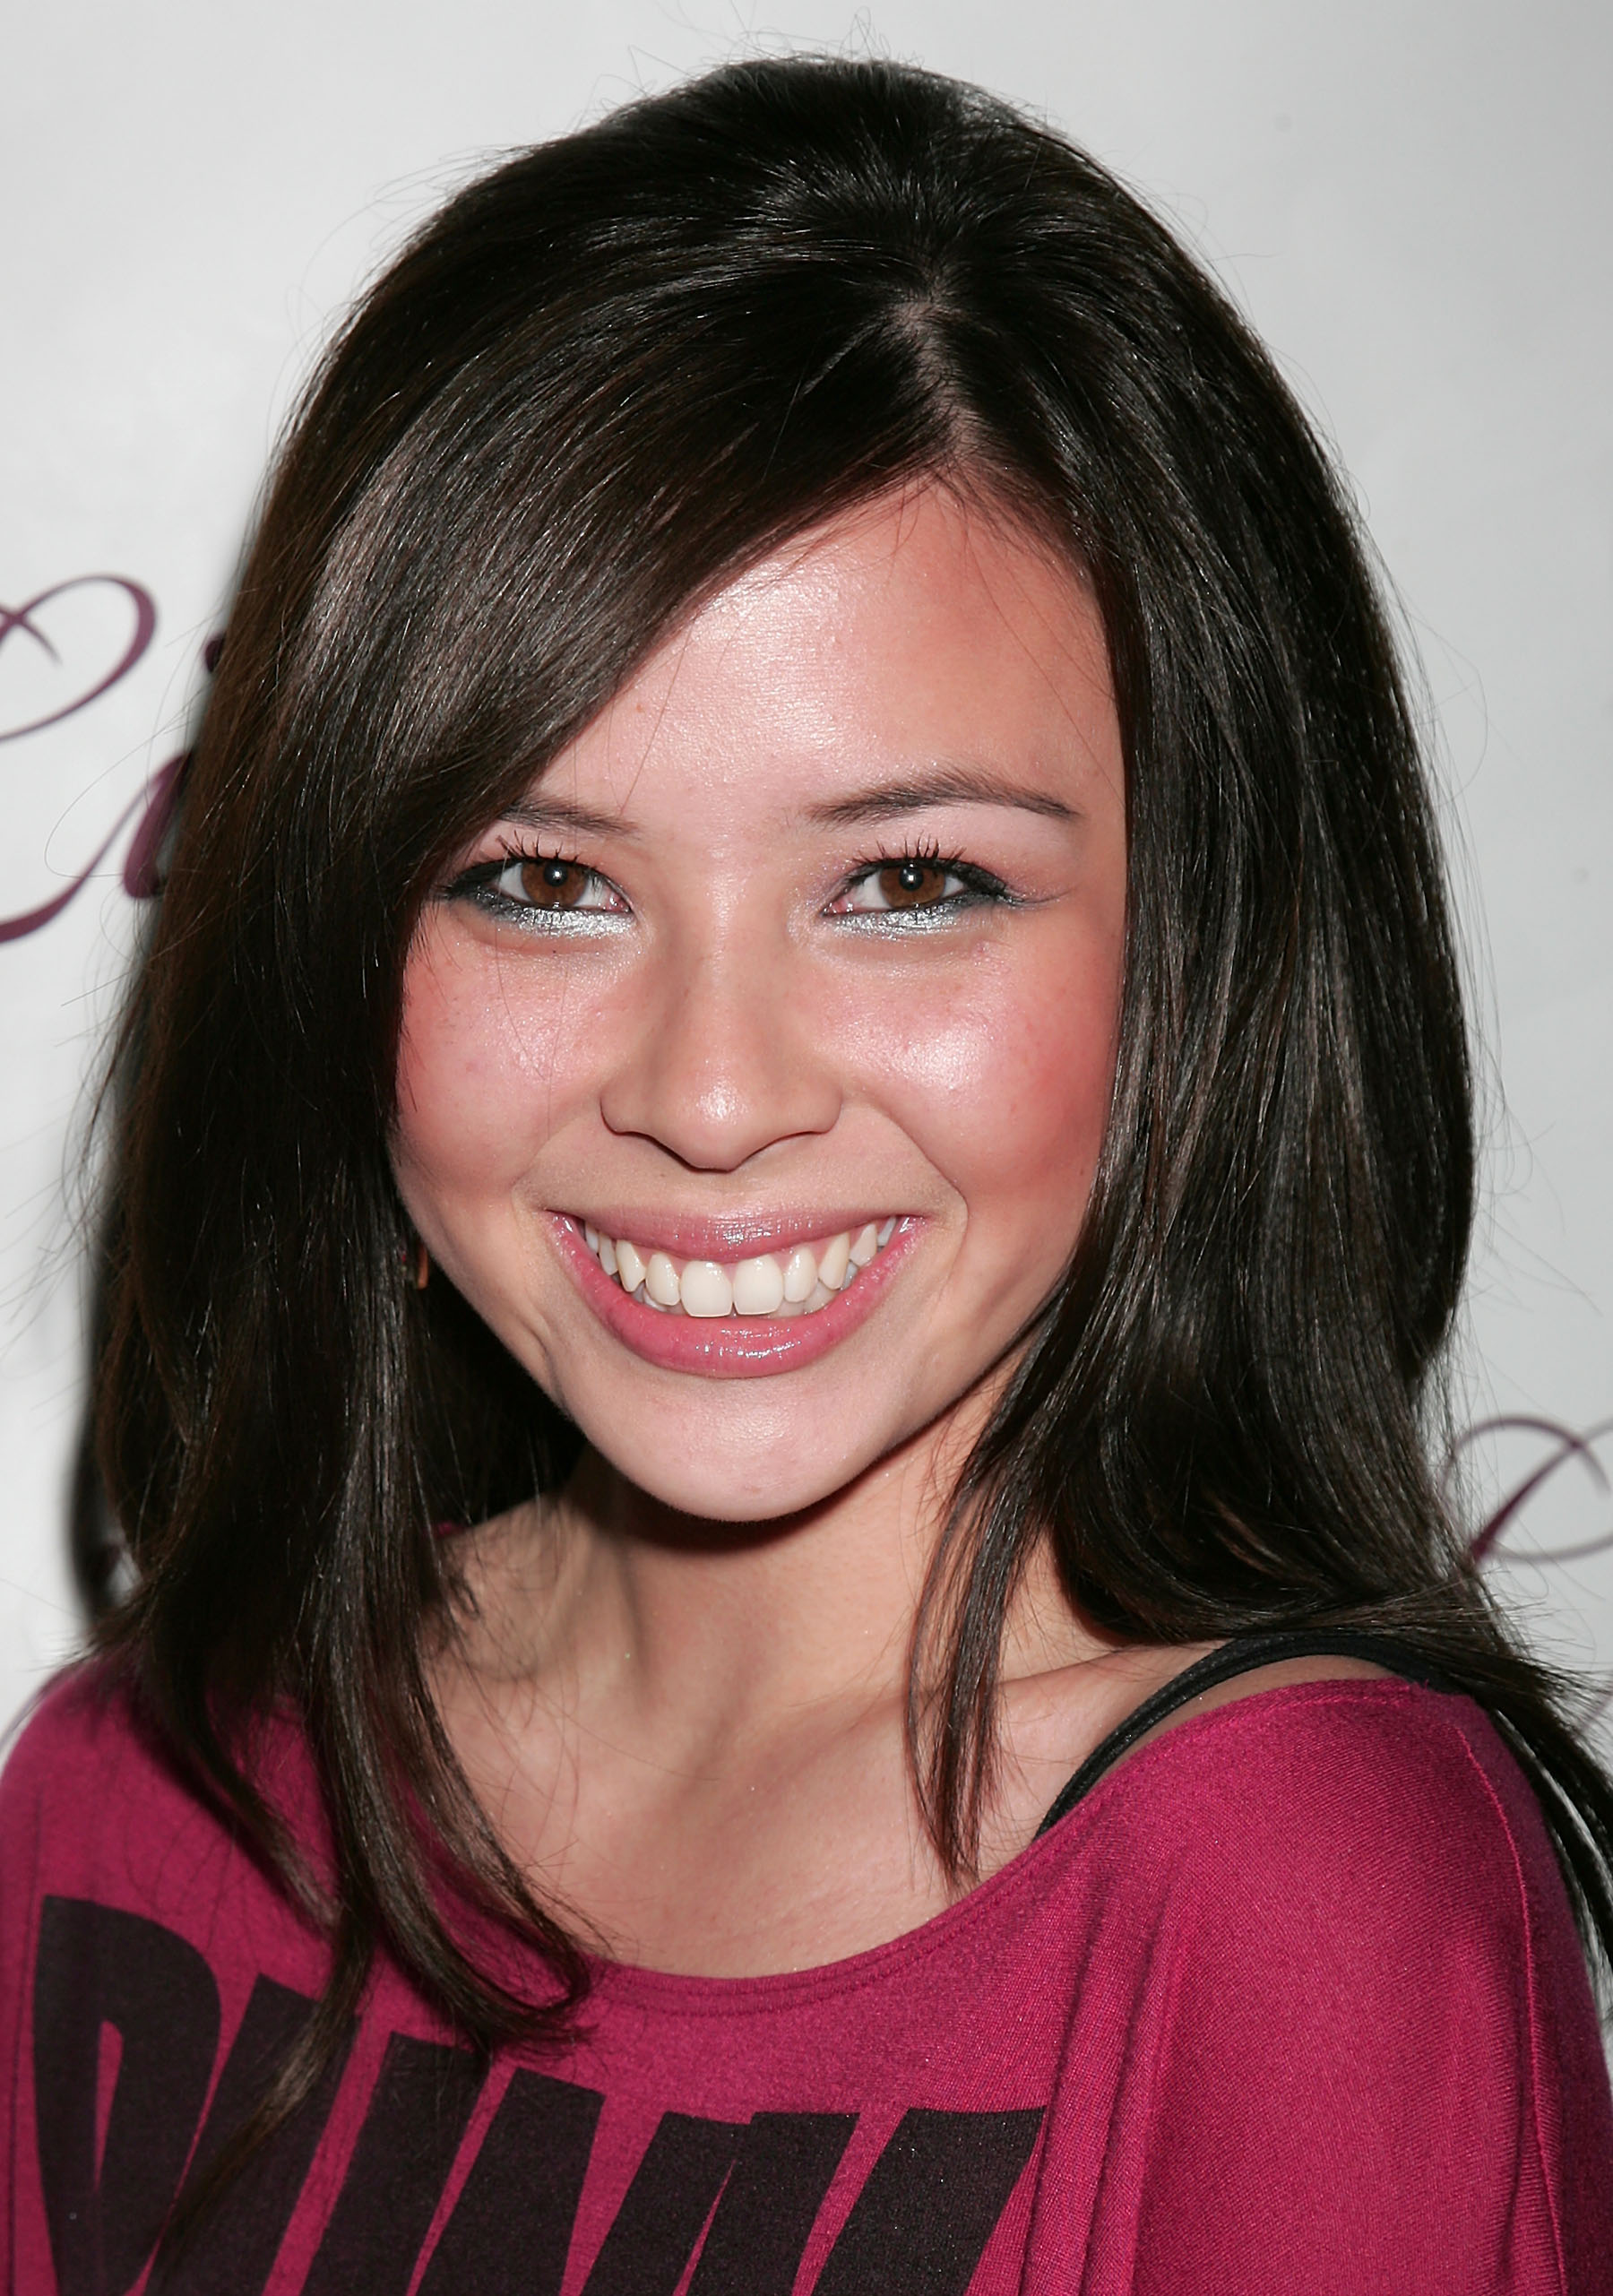 Malese Jow - Images